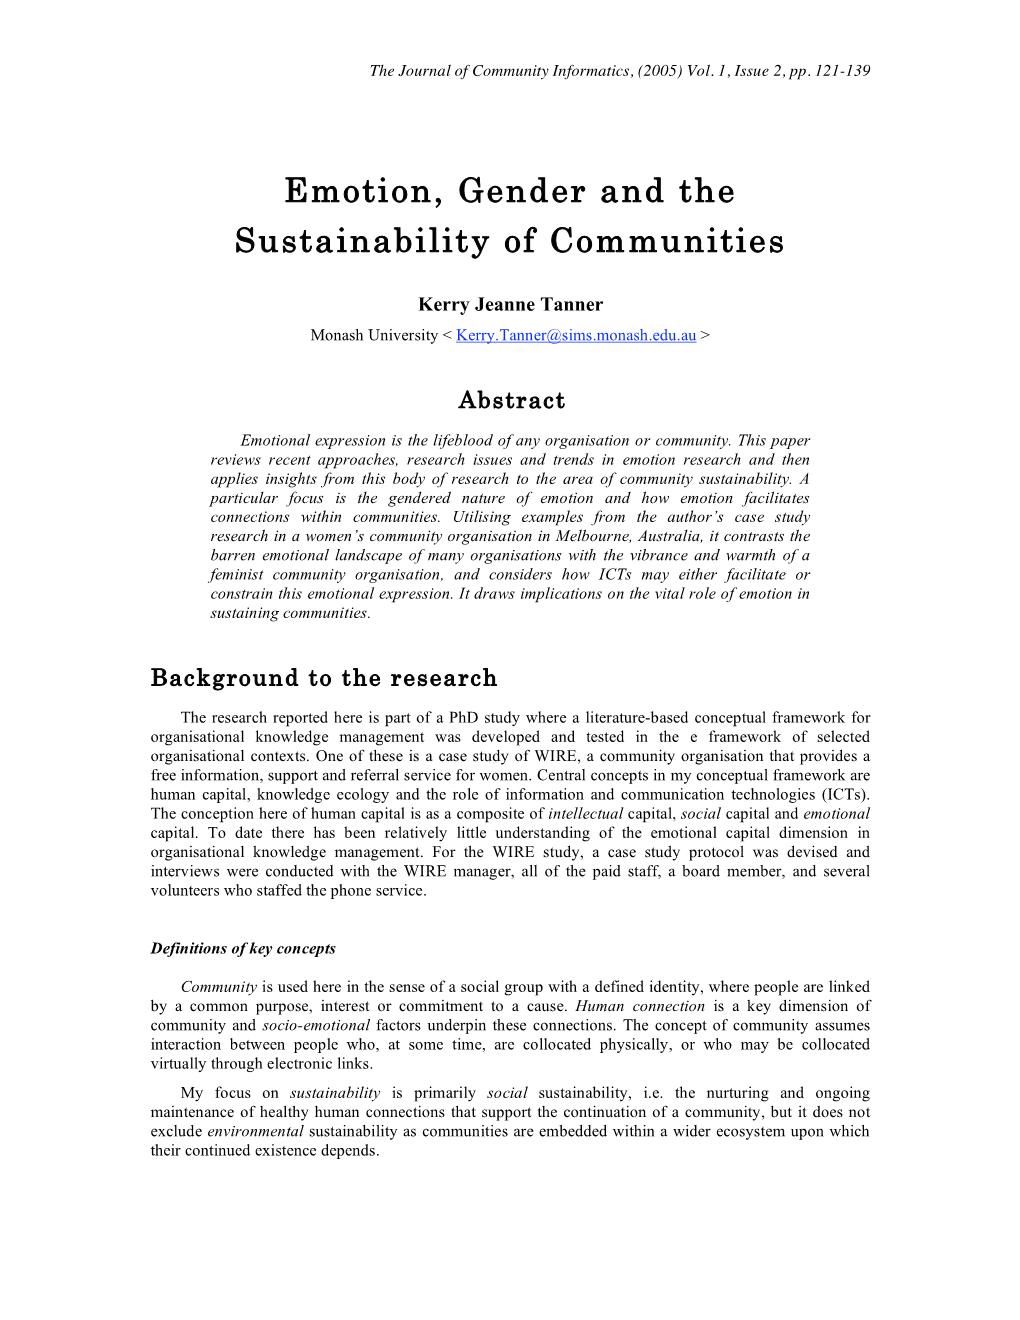 Emotion, Gender and the Sustainability of Communities